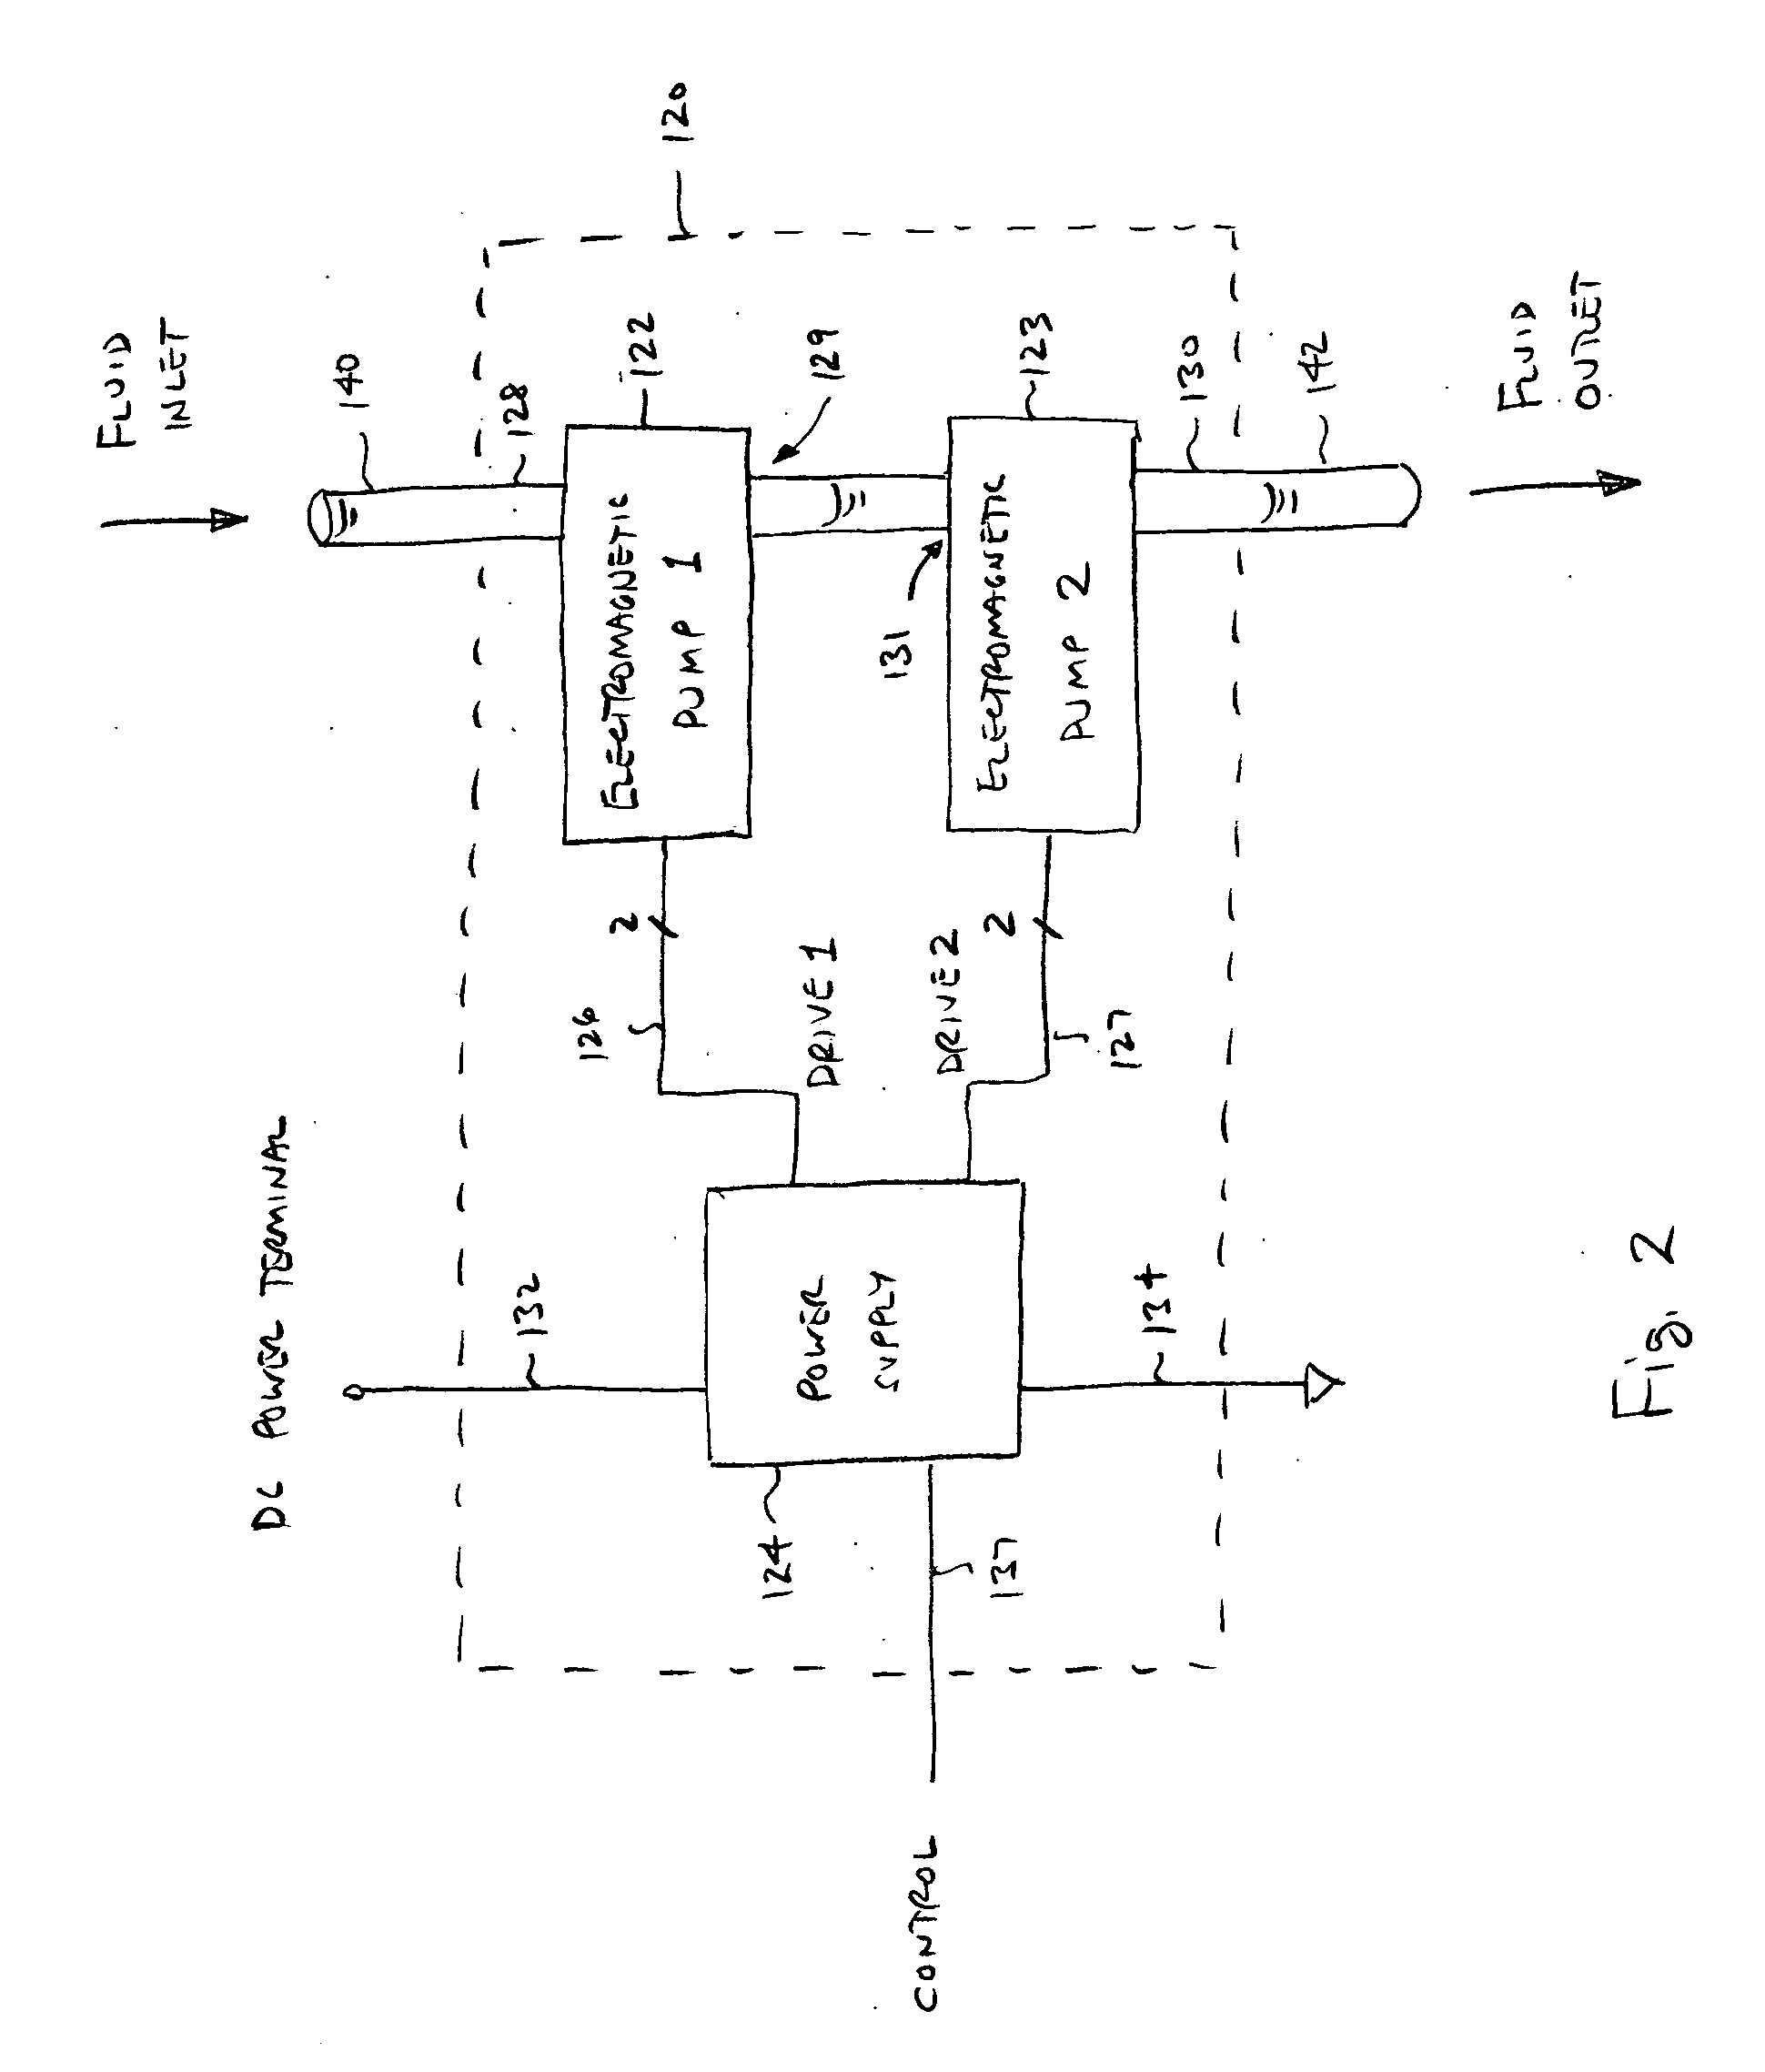 Series gated secondary loop power supply configuration for electromagnetic pump and integral combination thereof